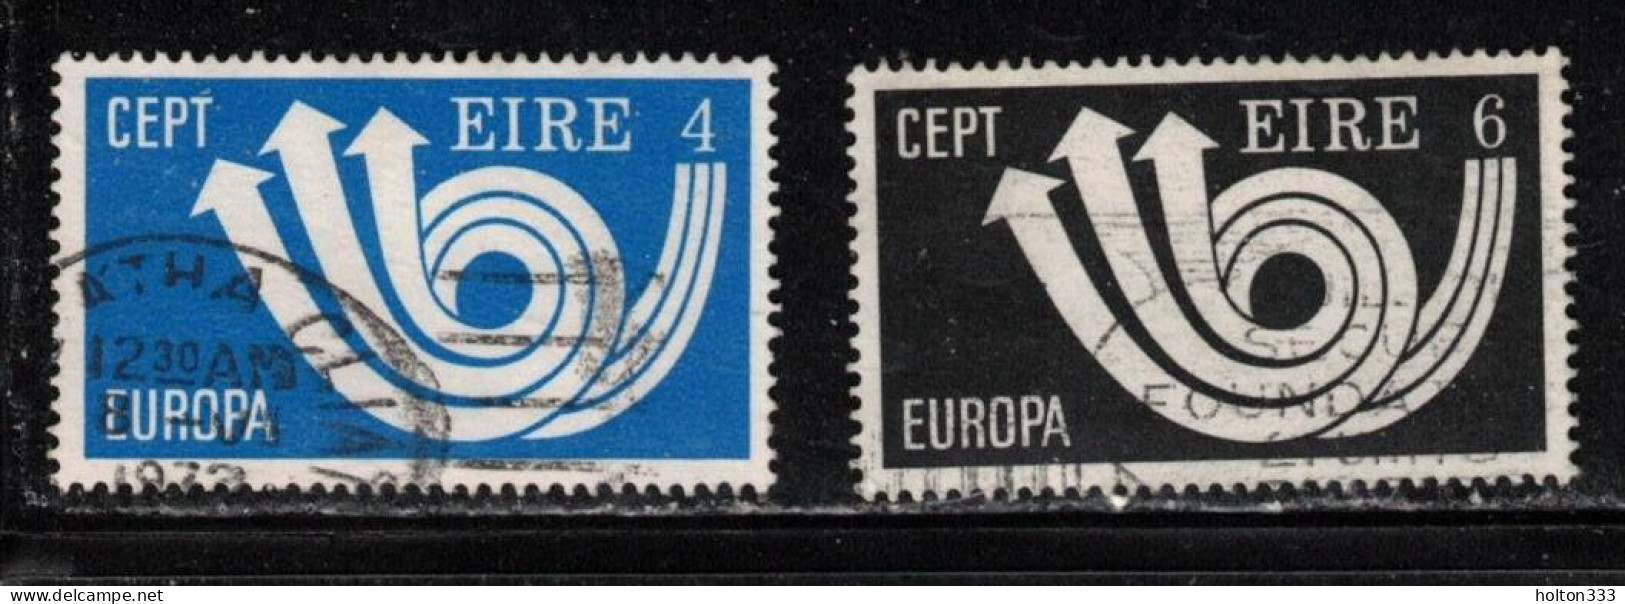 IRELAND Scott # 329-30 Used - 1973 Europa Issue - Used Stamps